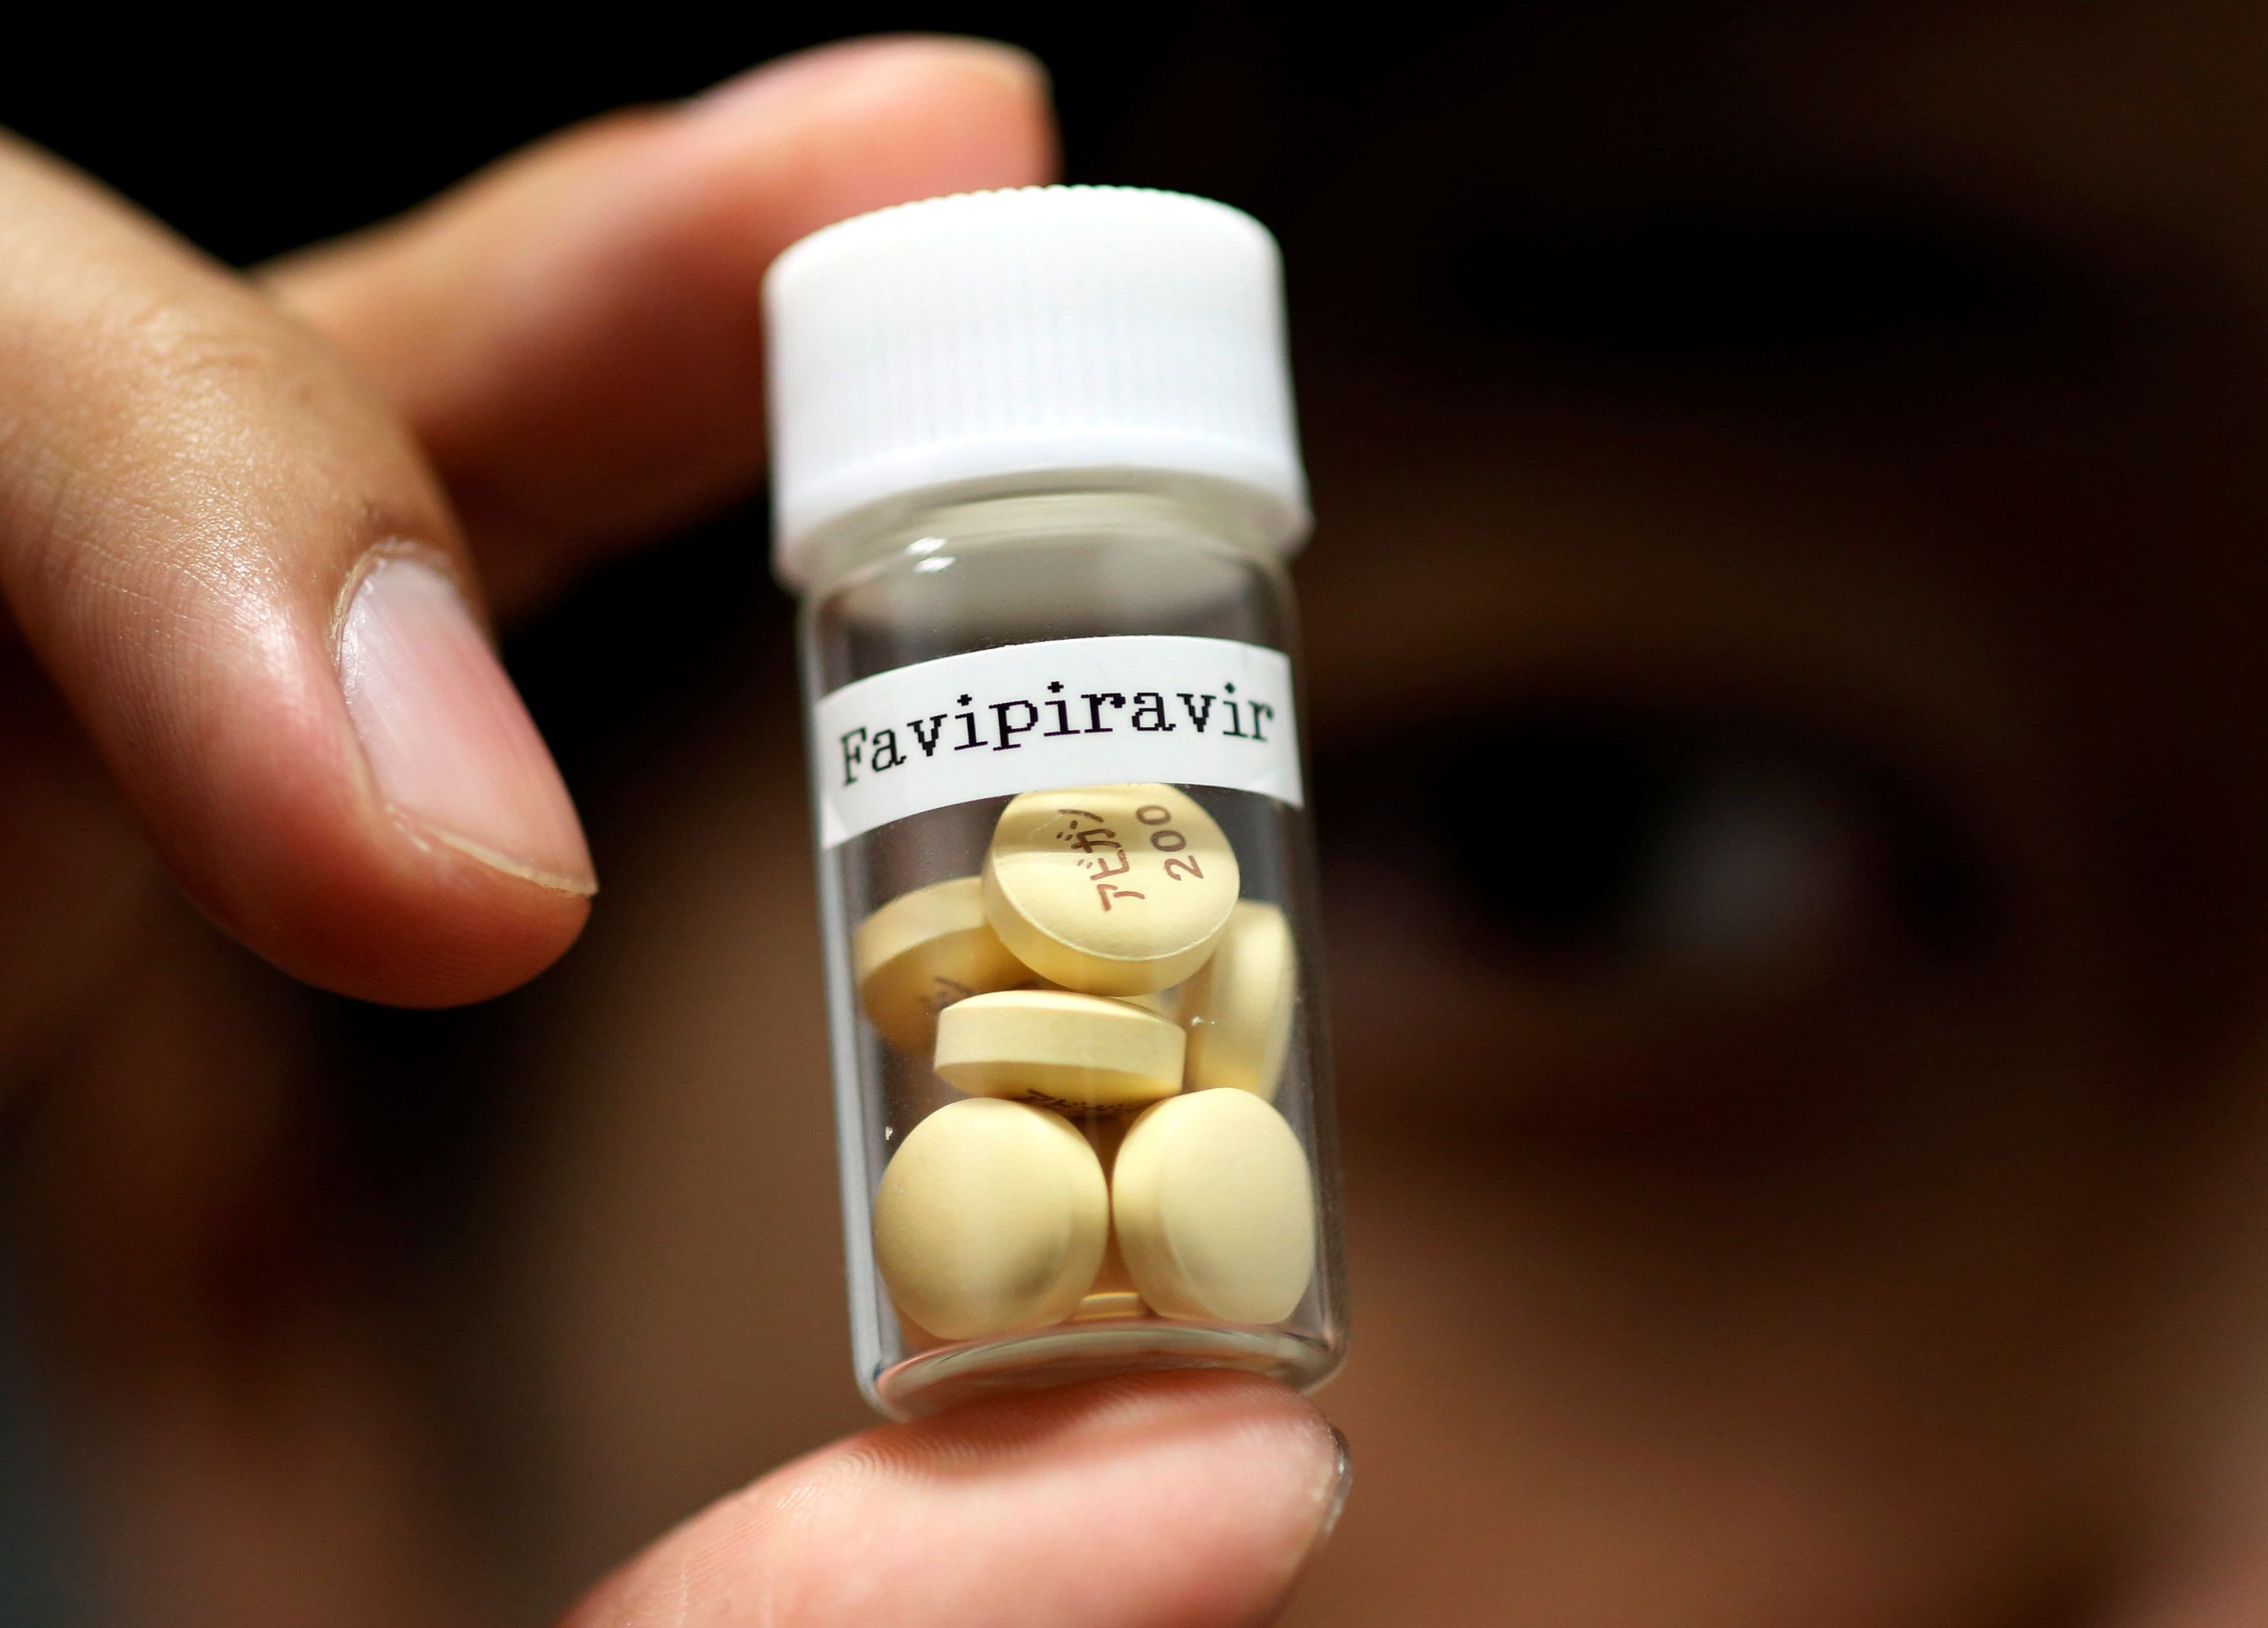 Avigan is currently approved for manufacture and sale in Japan as an antiviral drug for flu. (Credit: Reuters Photo)